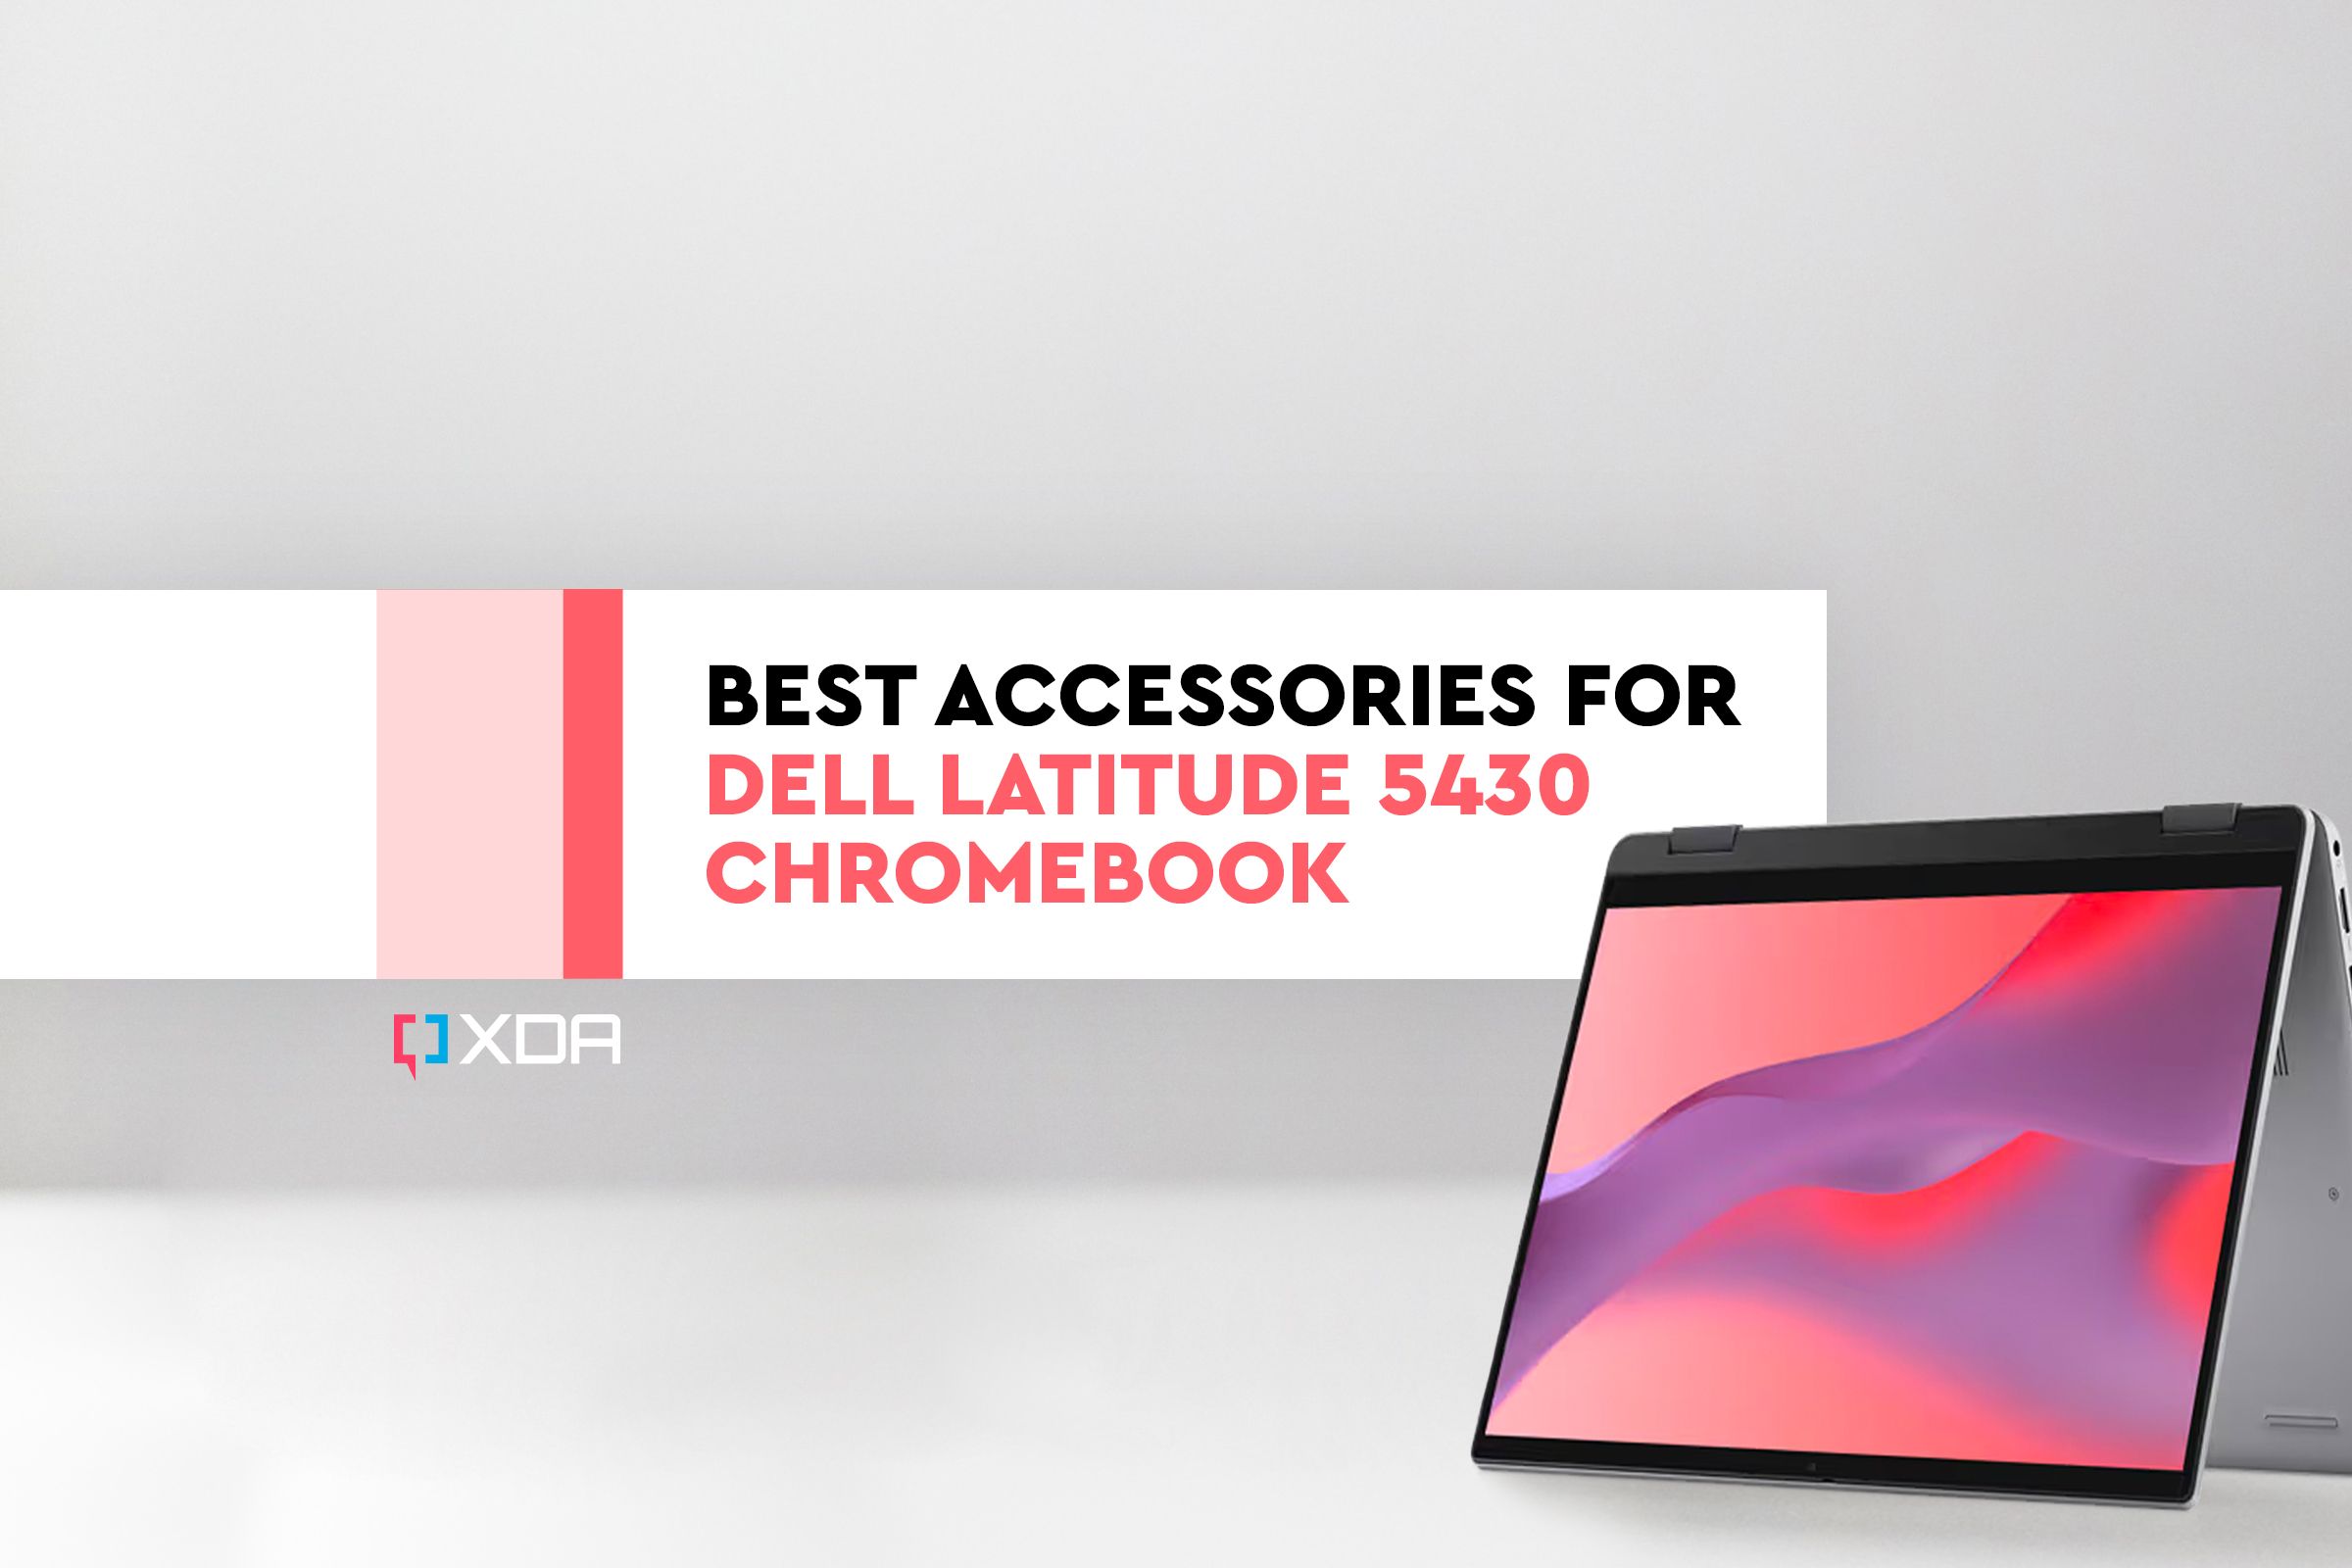 Best accessories for Dell Latitude 5430 Chromebook in 2023